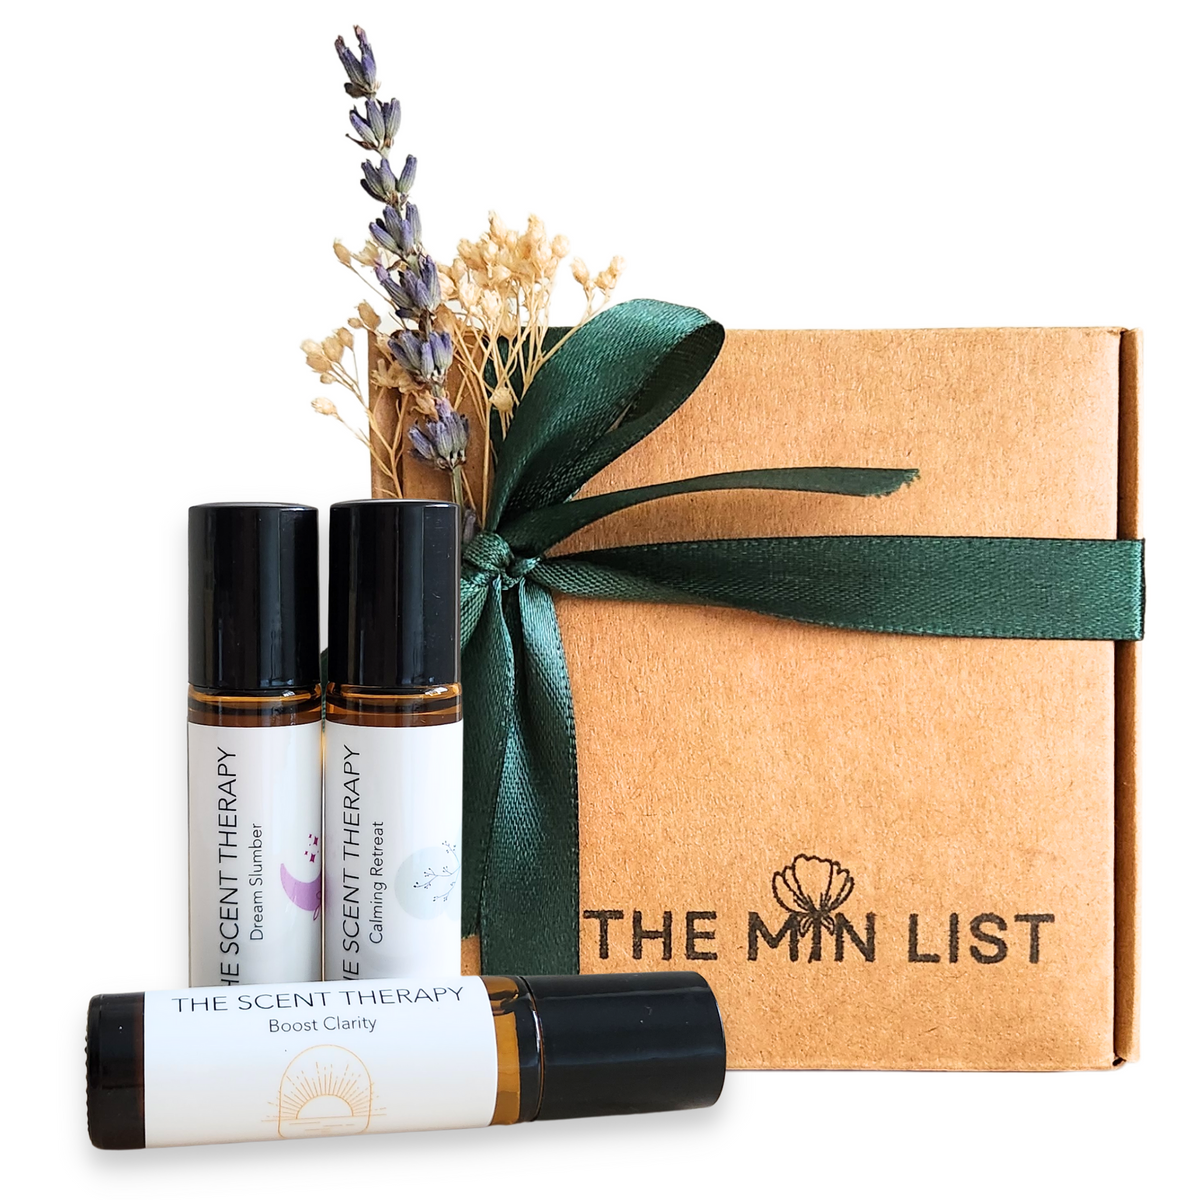 The Scent Therapy Essential Oil Roll-On Kit